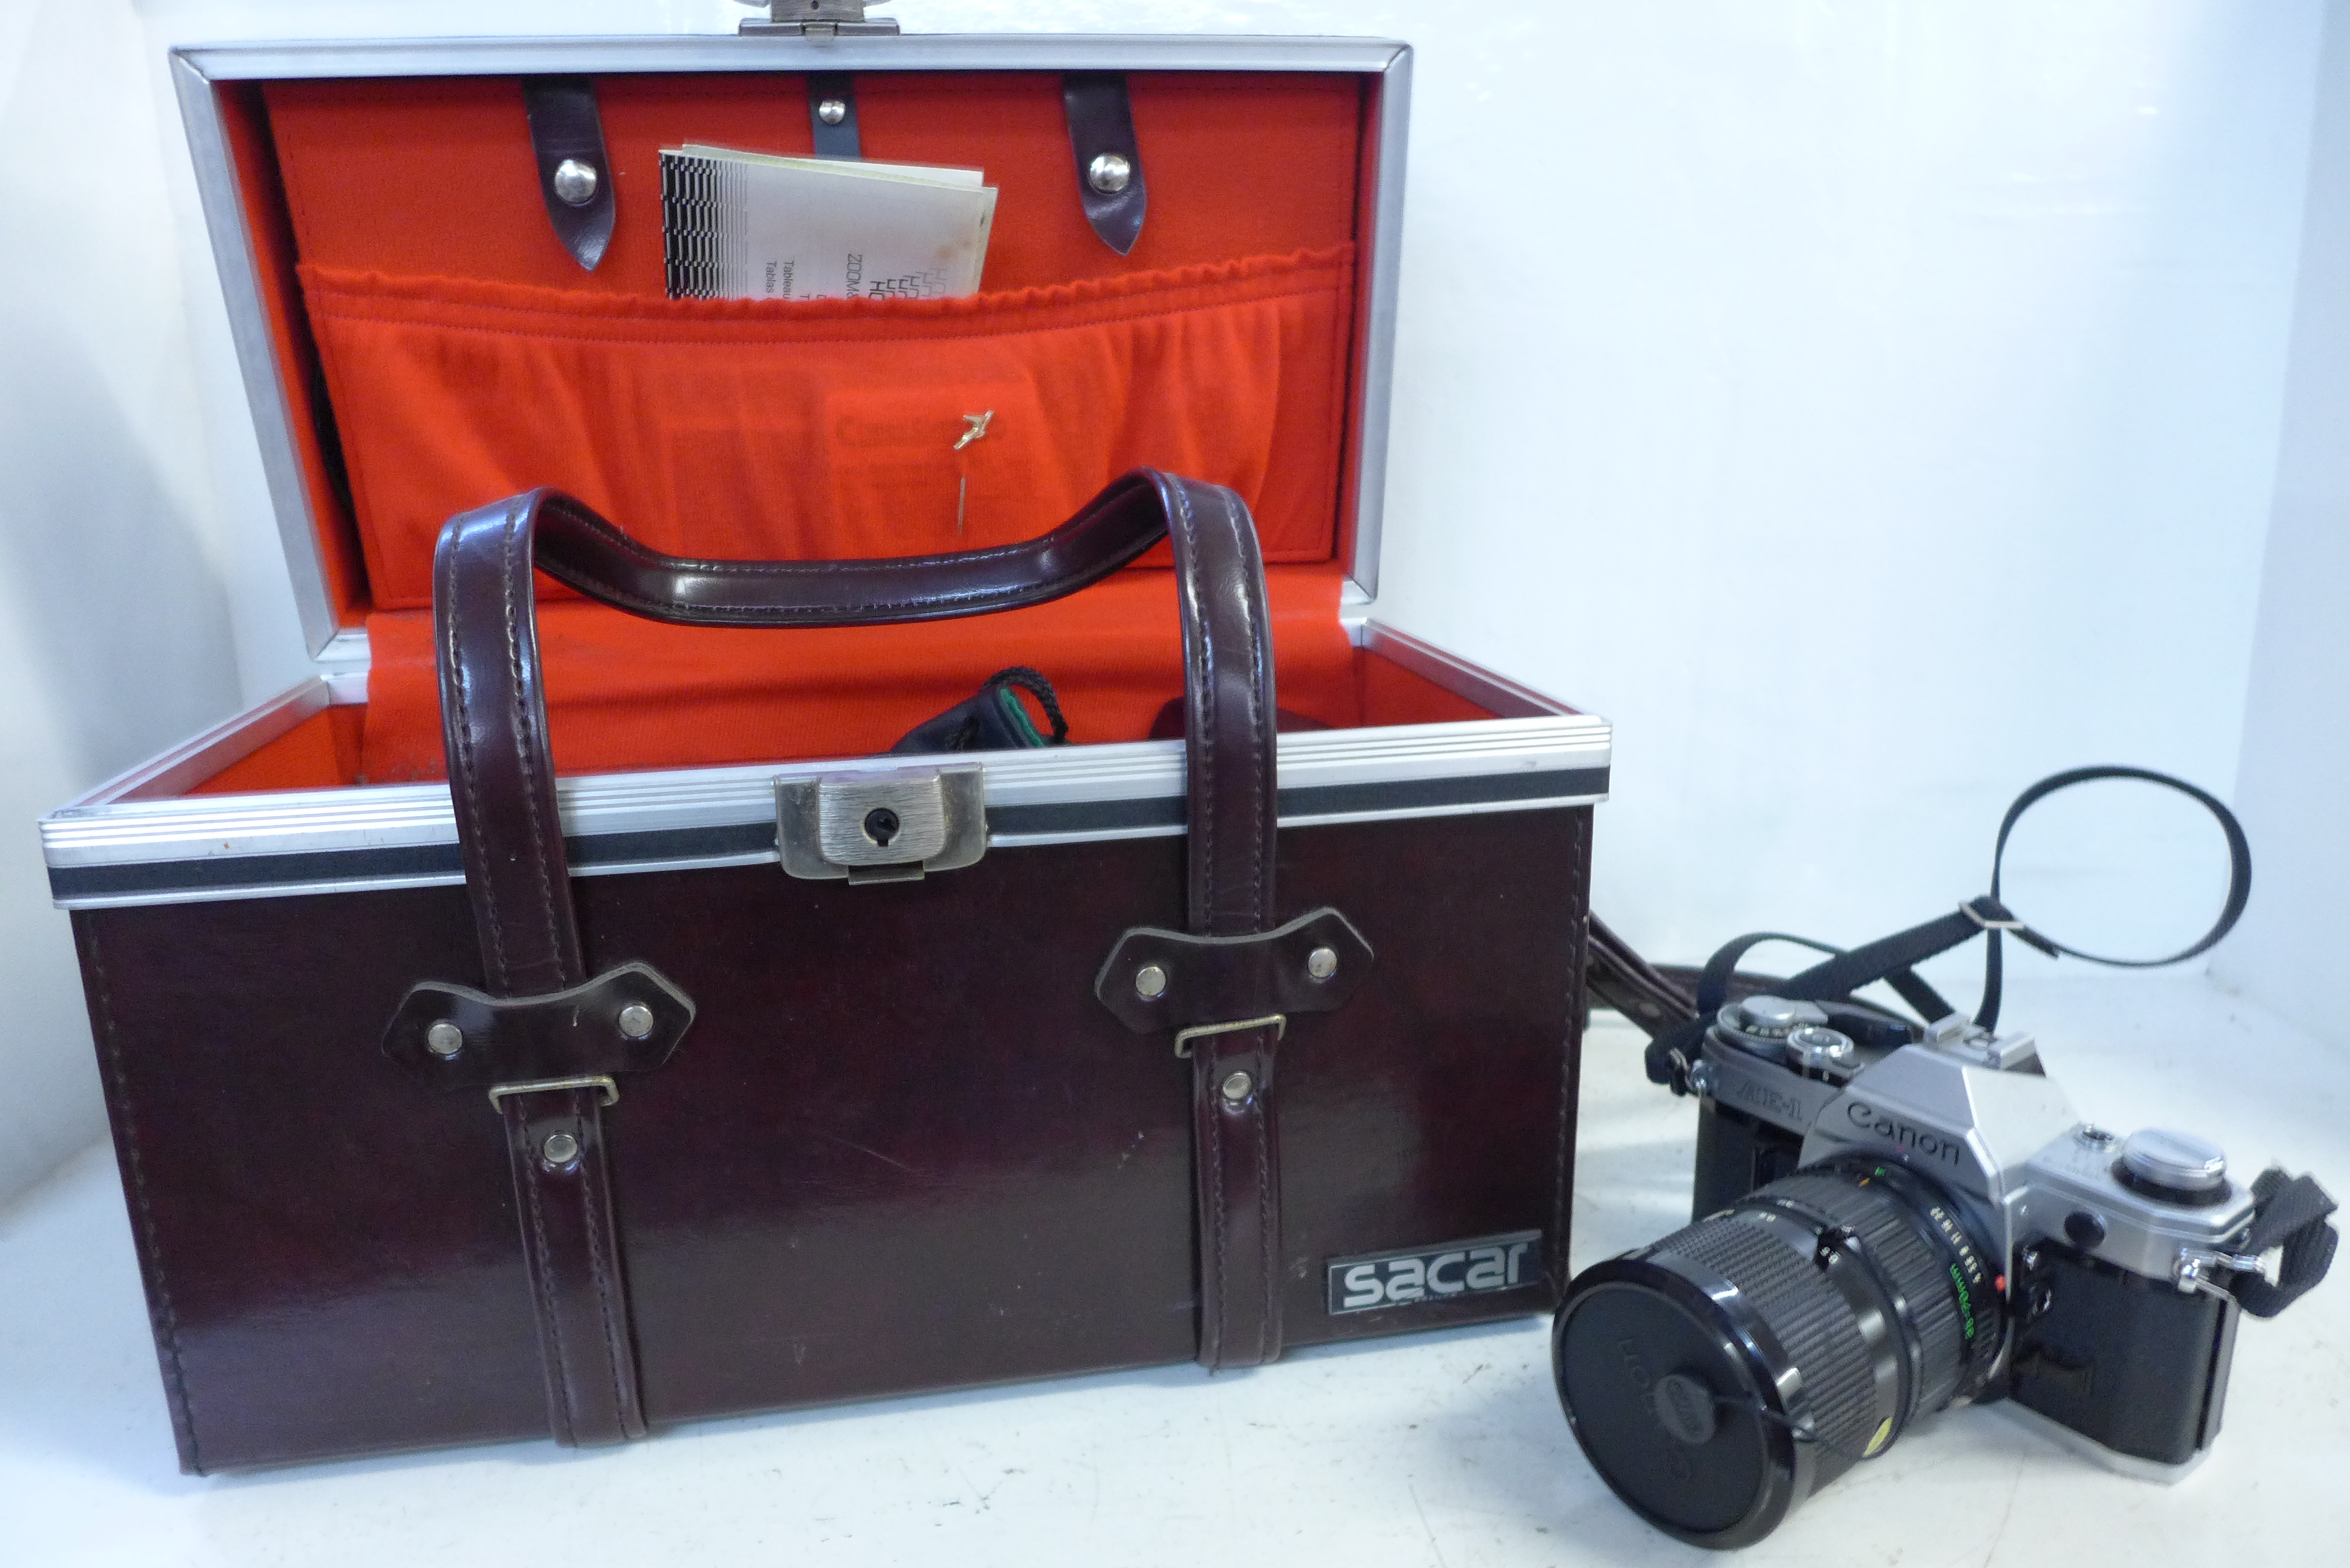 A Canon AE-1 camera with box and accessories including lenses, filters, etc.